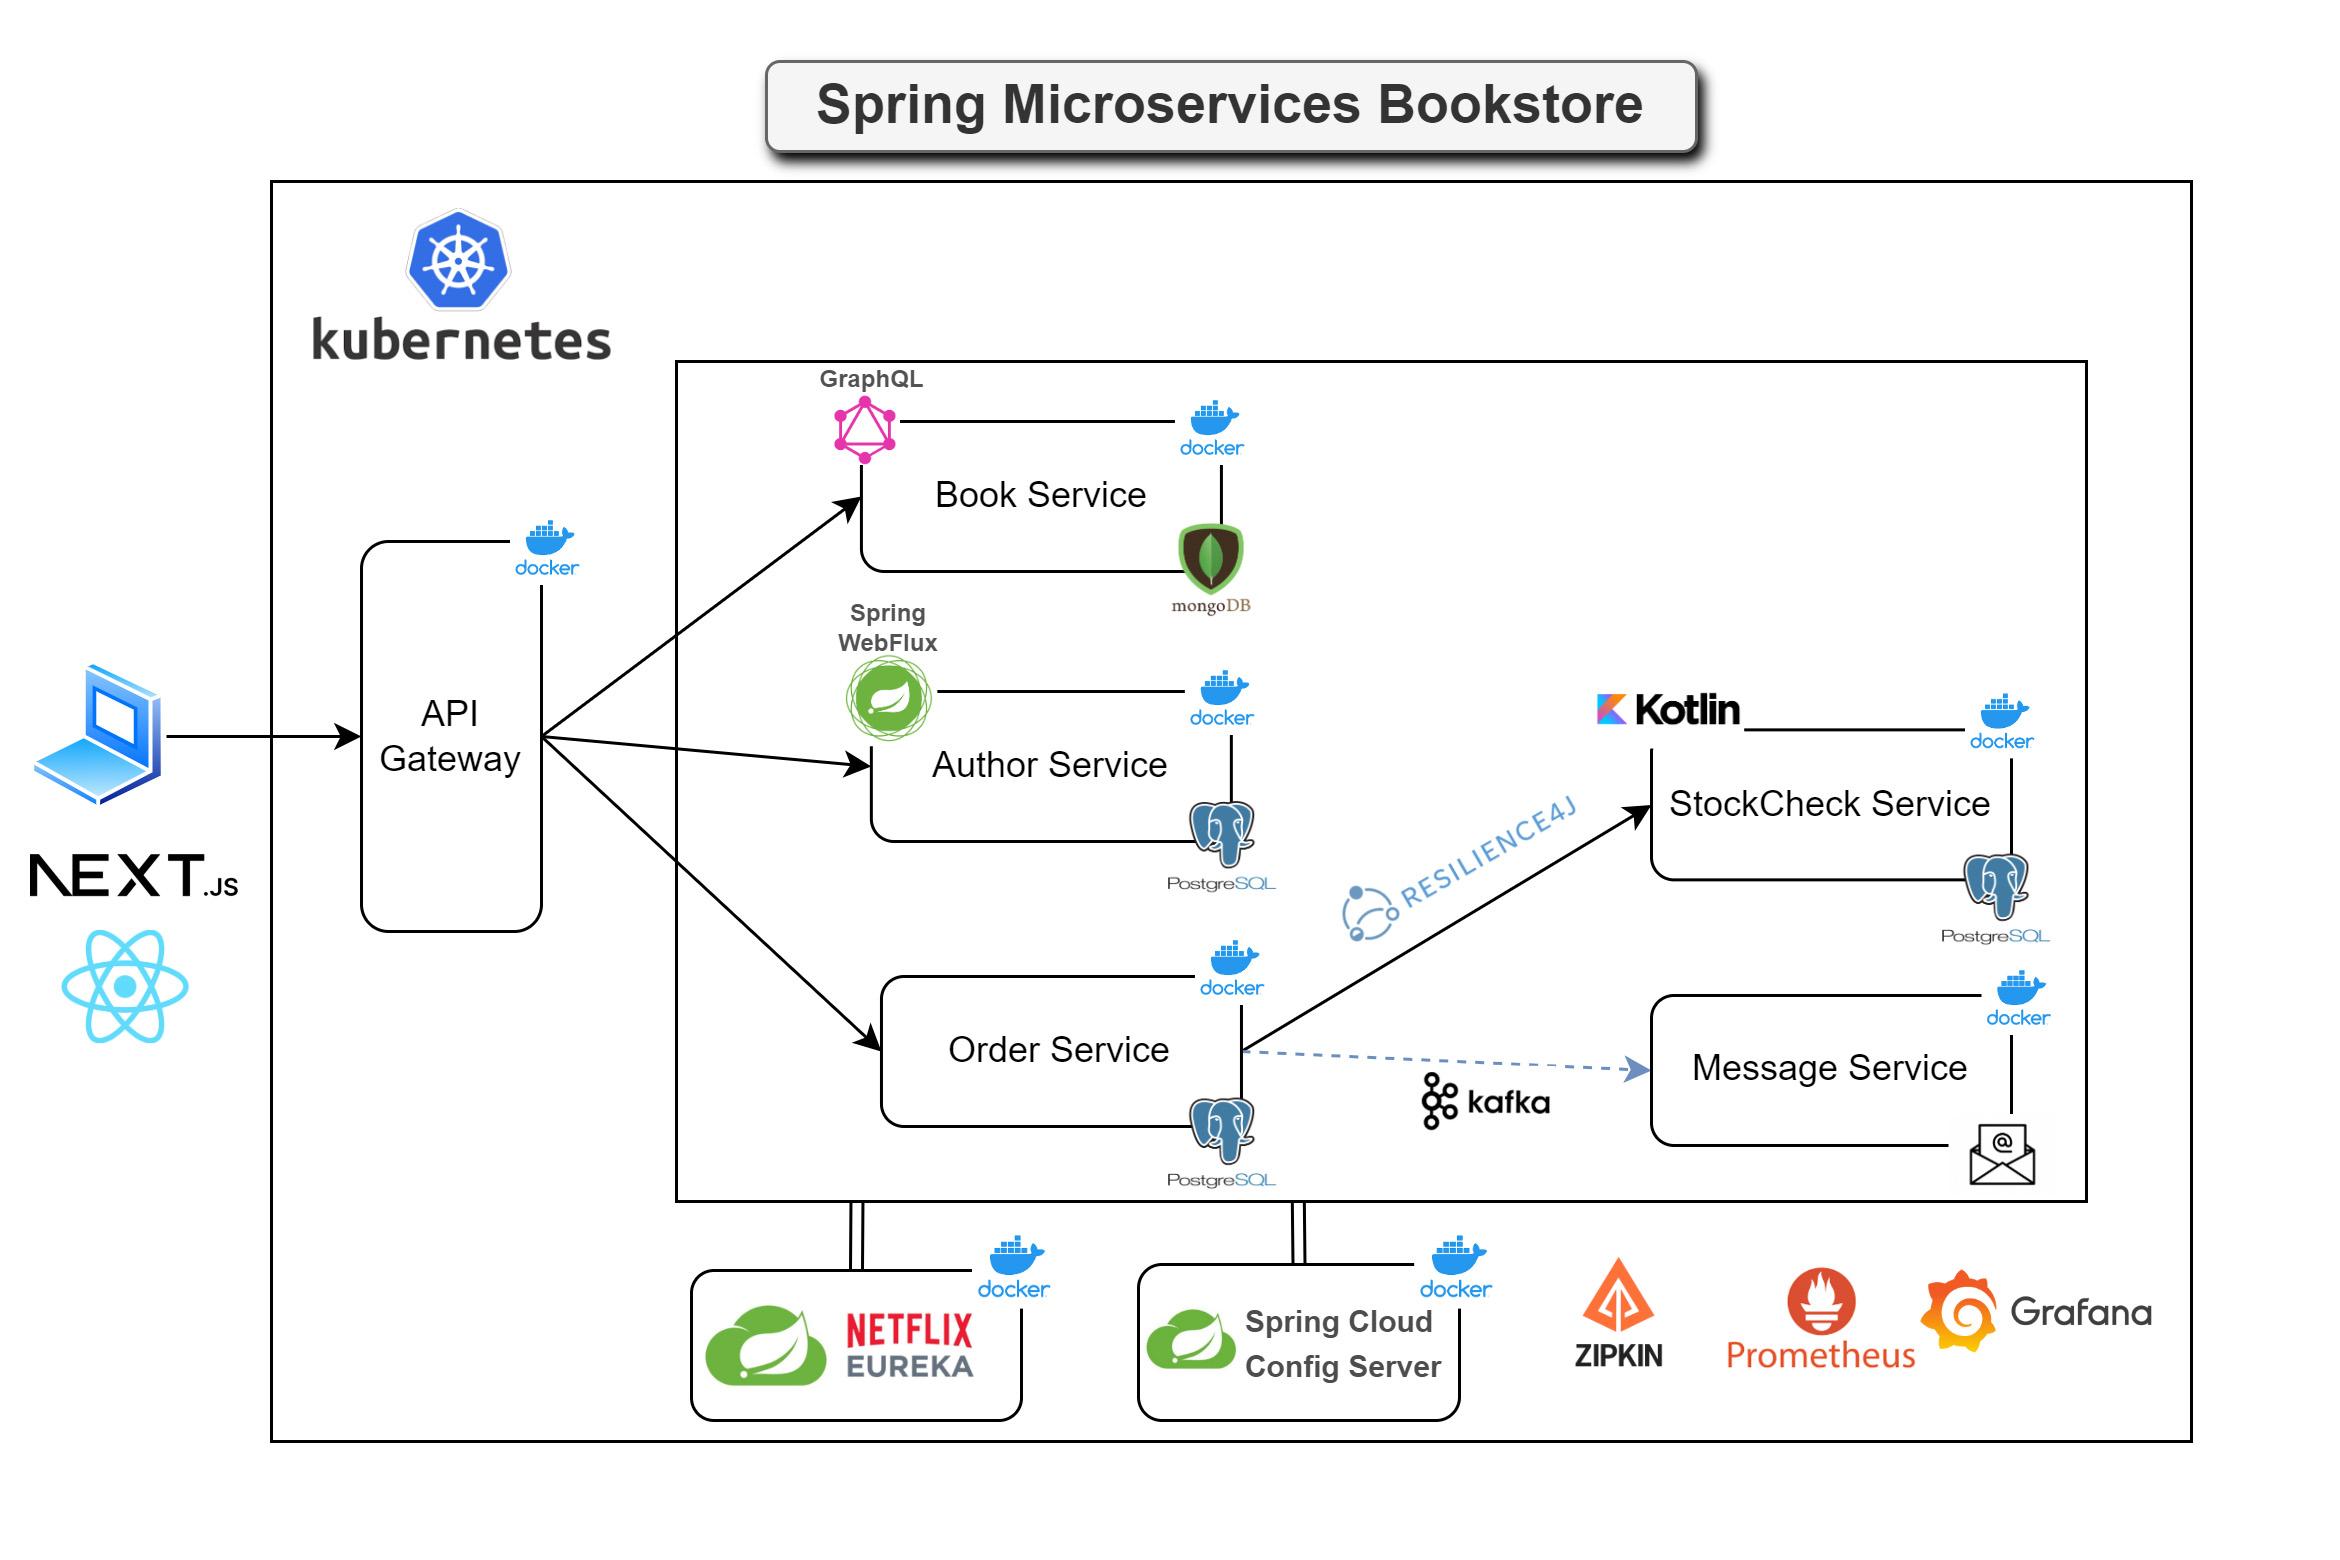 Diagram of the Spring Microservices Bookstore showcasing a microservices architecture with various services and technologies like Docker, Kafka, Resilience4J, and PostgreSQL.